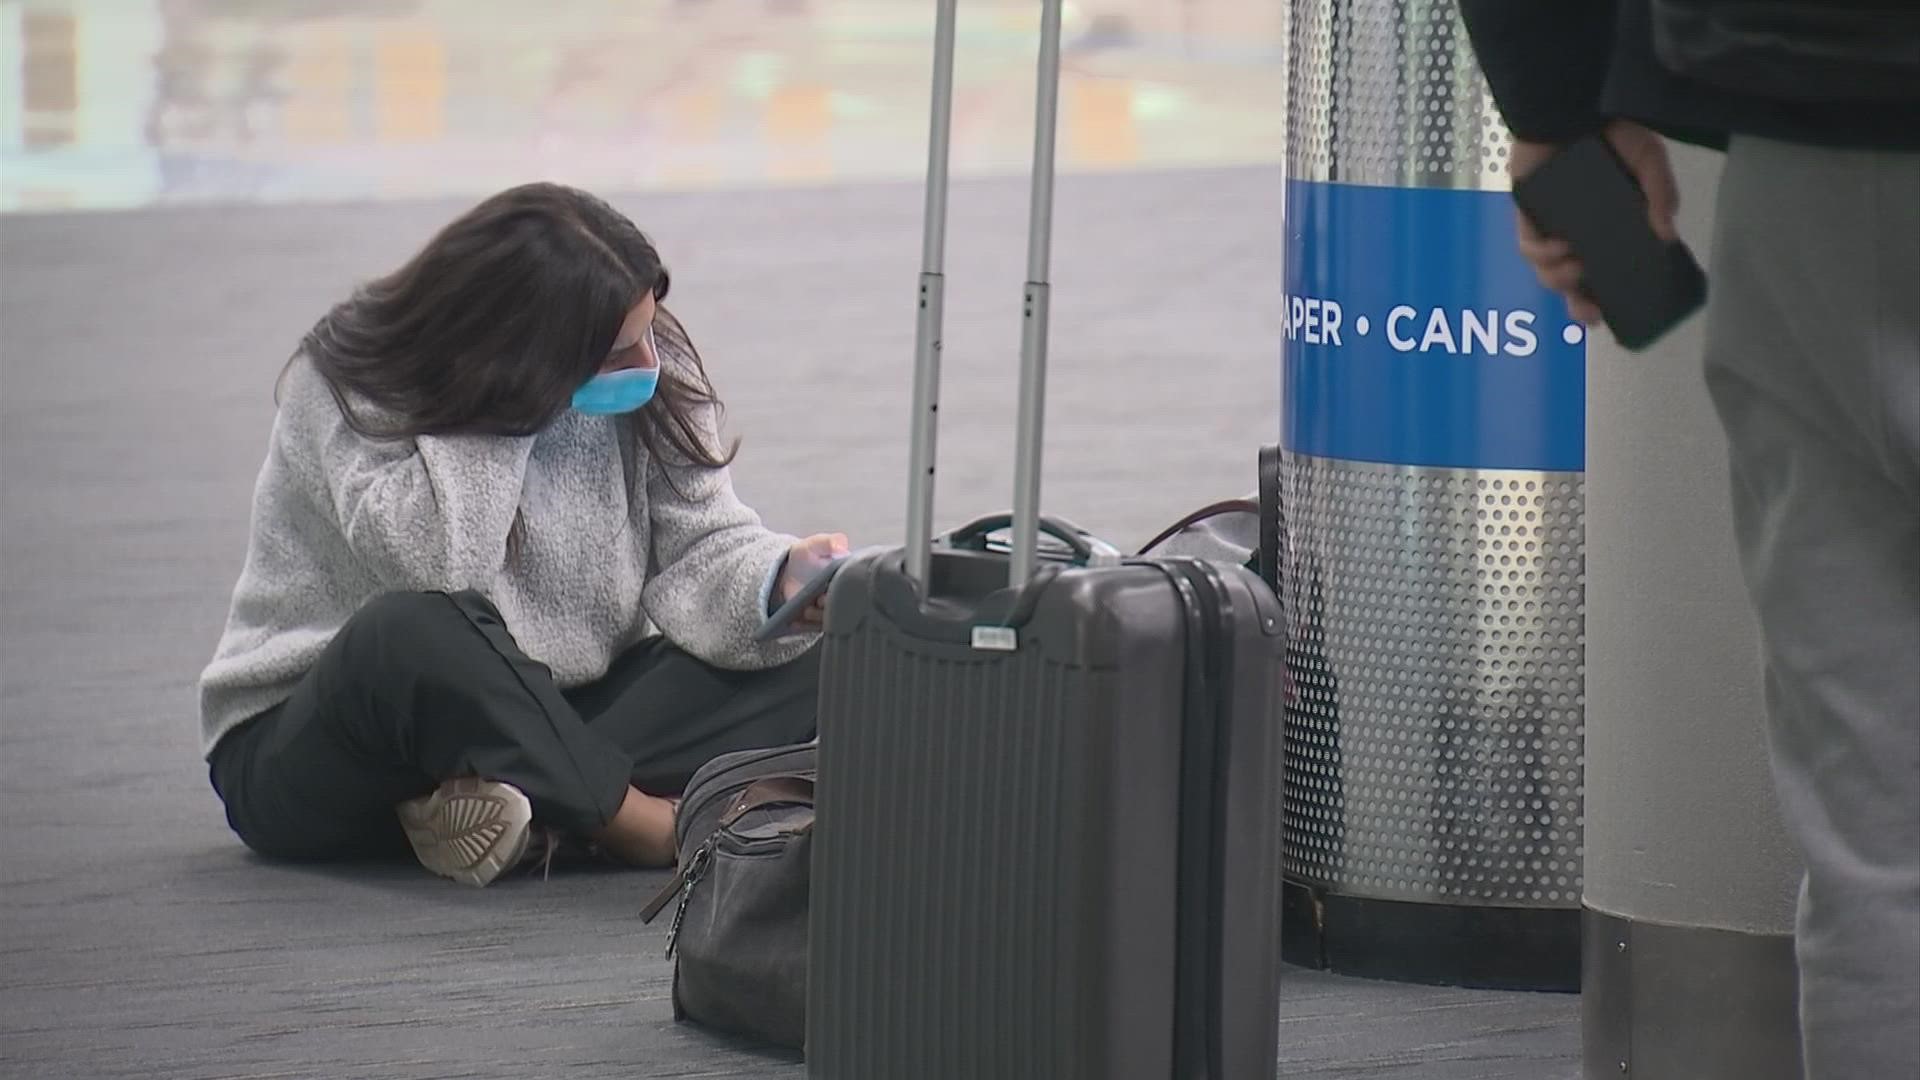 Staffing shortages and weather are being blamed for major airline cancellations over the weekend.